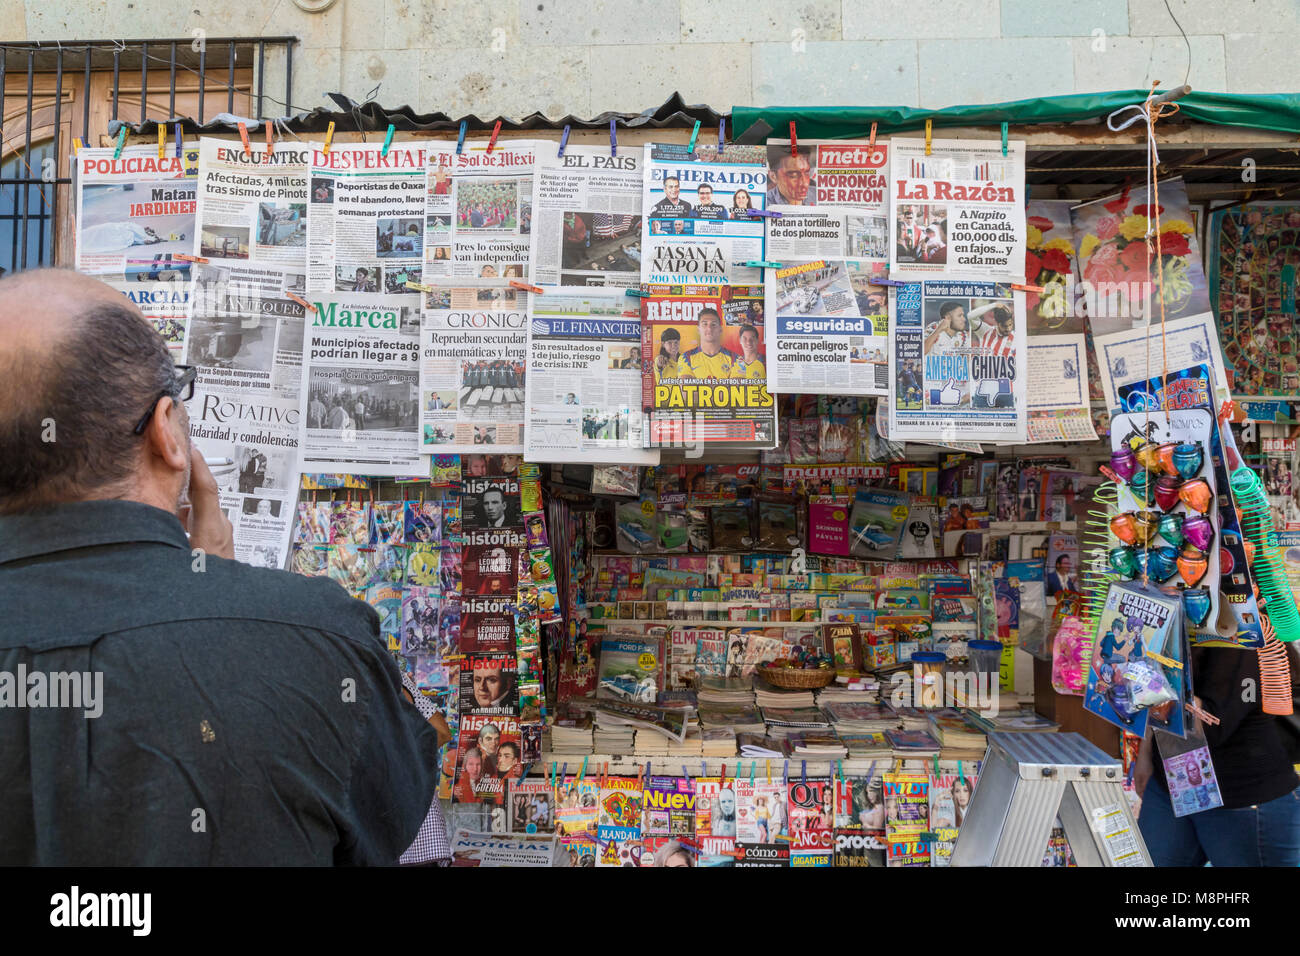 Oaxaca, Oax., Mexico - A man reads the headlines of the many newspapers on sale at a newsstand. Stock Photo